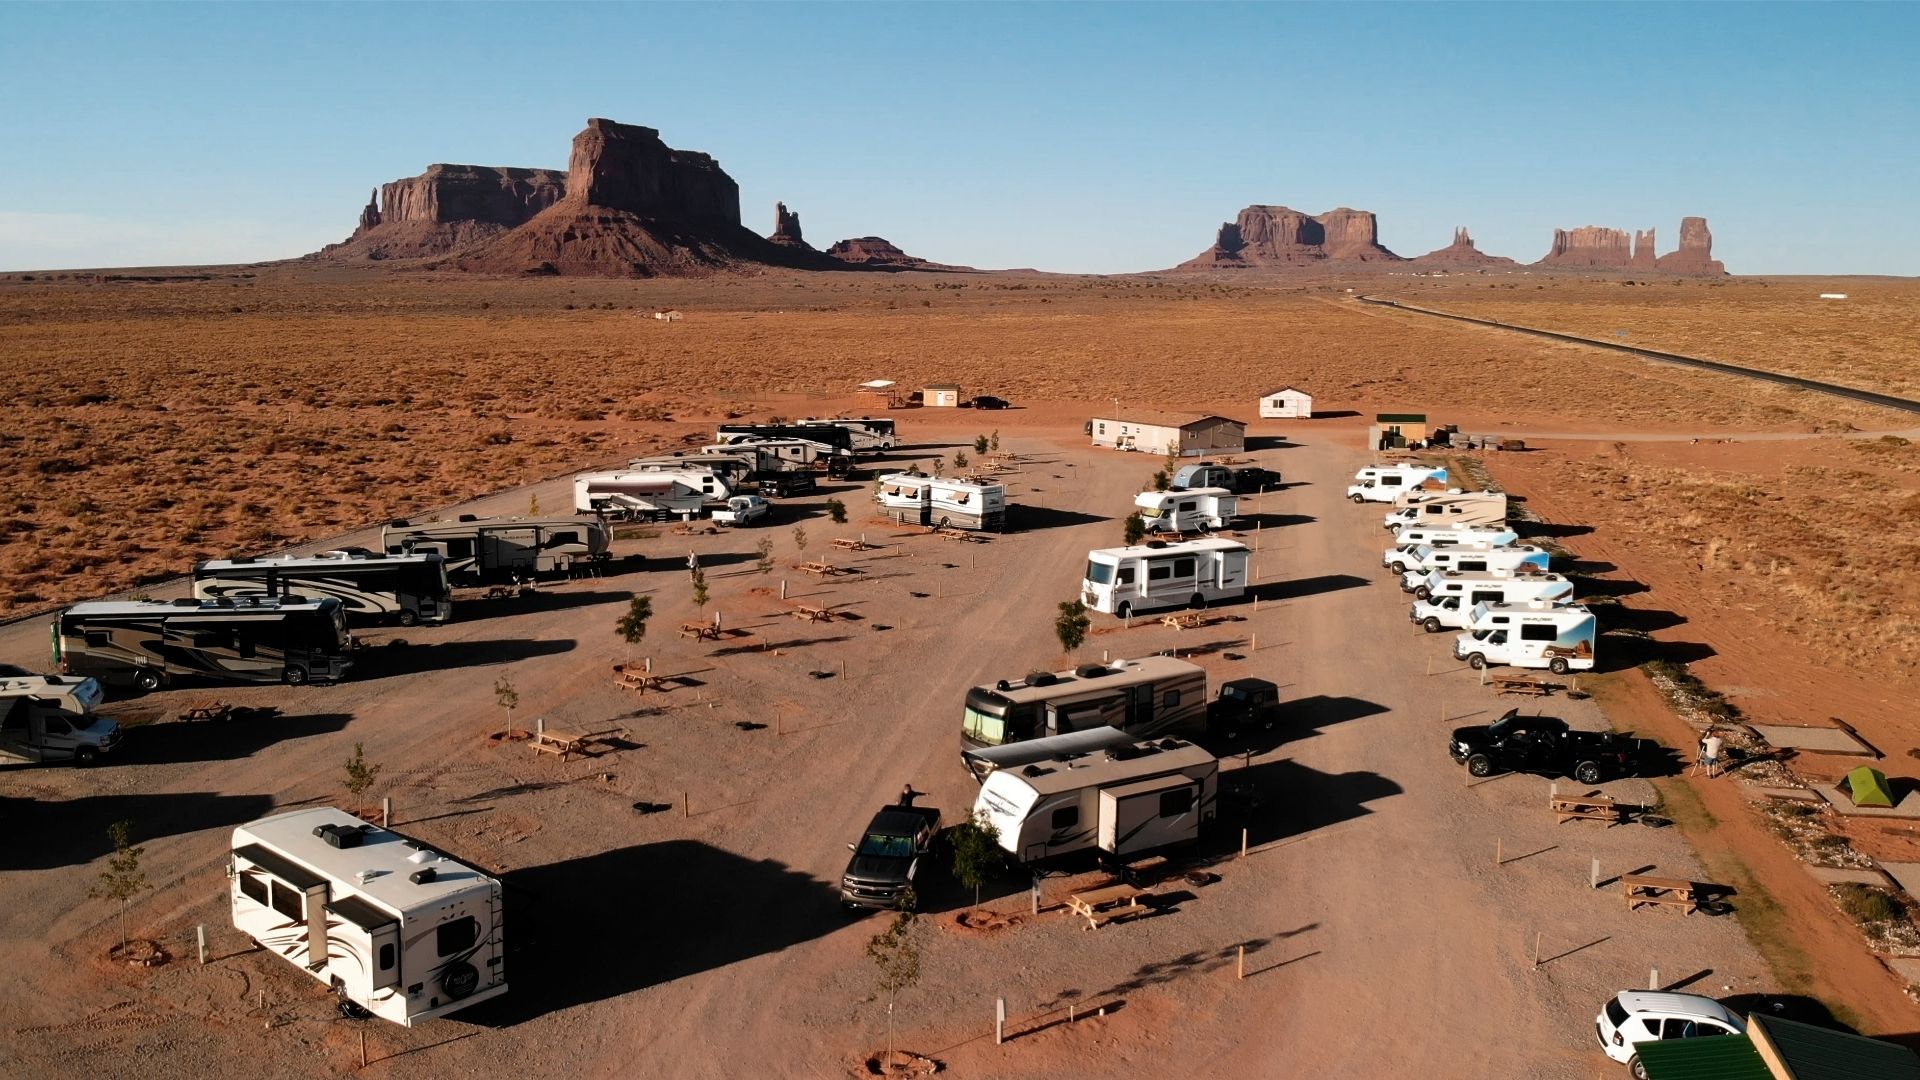 Aerial view of RV campground in Utah with rows of RVs and rock formations in the distance.